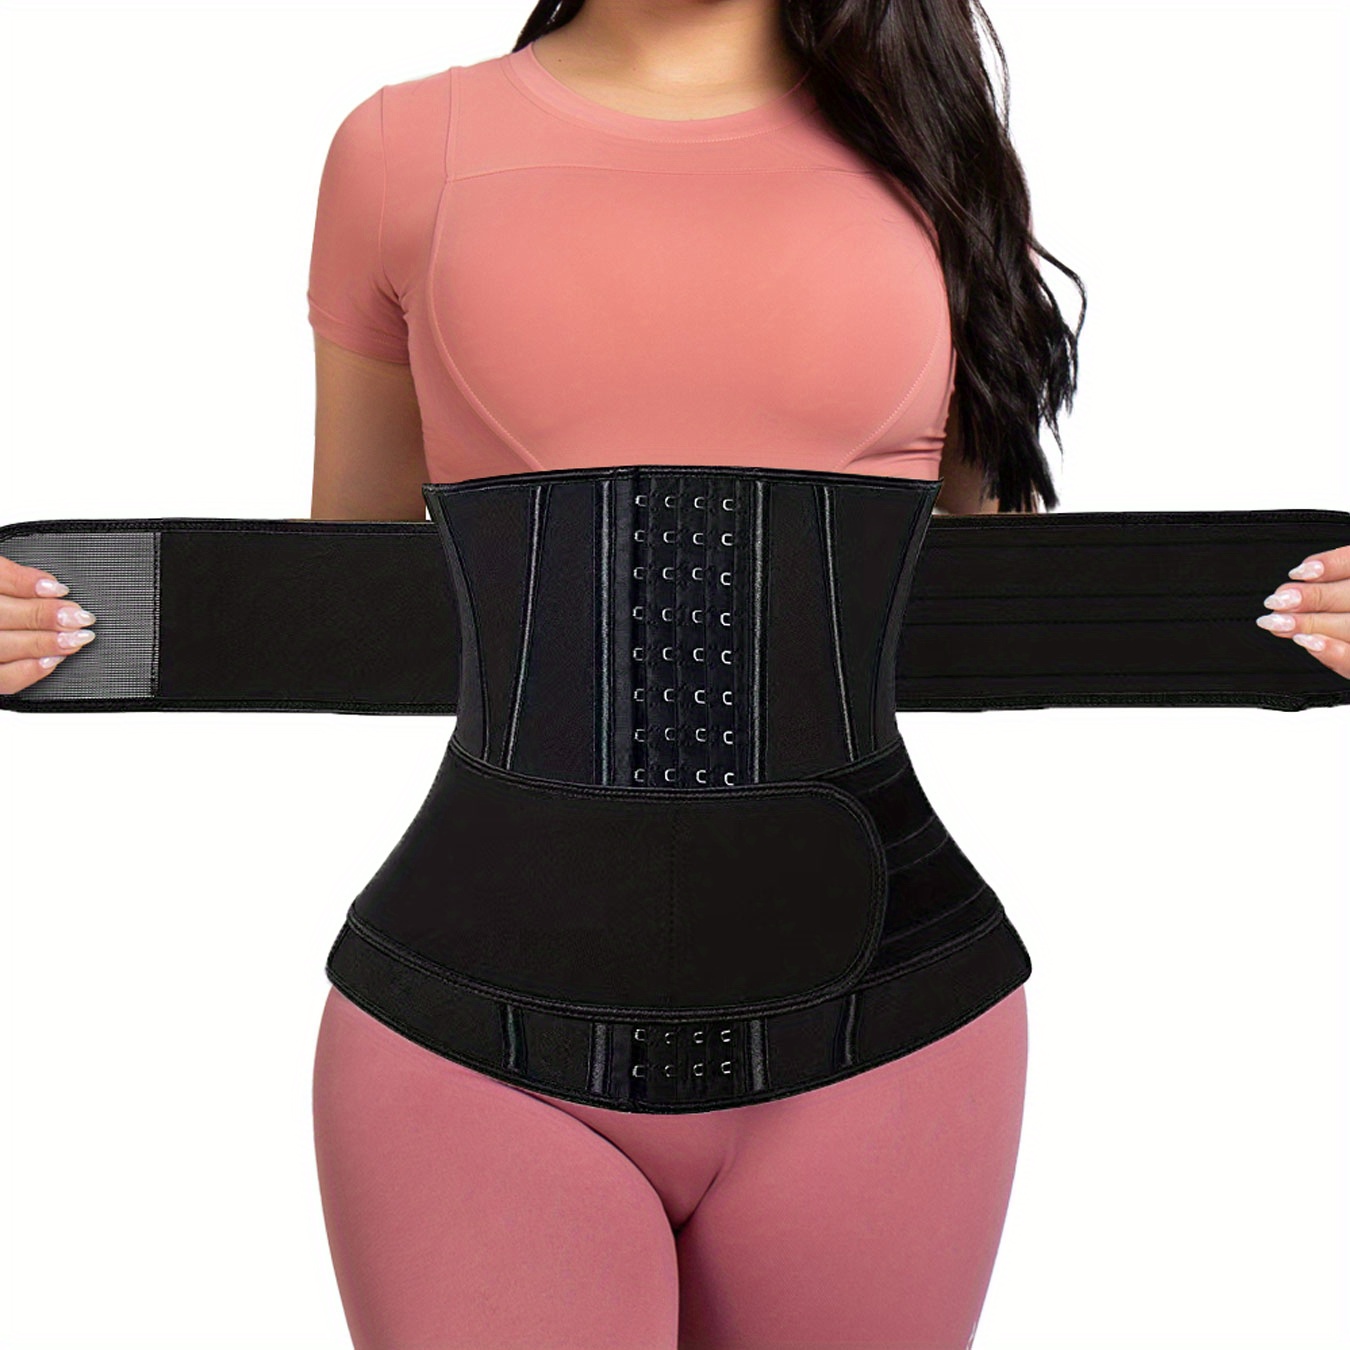 RISE Miss Belt Adjustable Waist Trimmer, Miss Belt Waist Trainer and Body  Shaper with Dual Adjustable Hook and Loop Closures